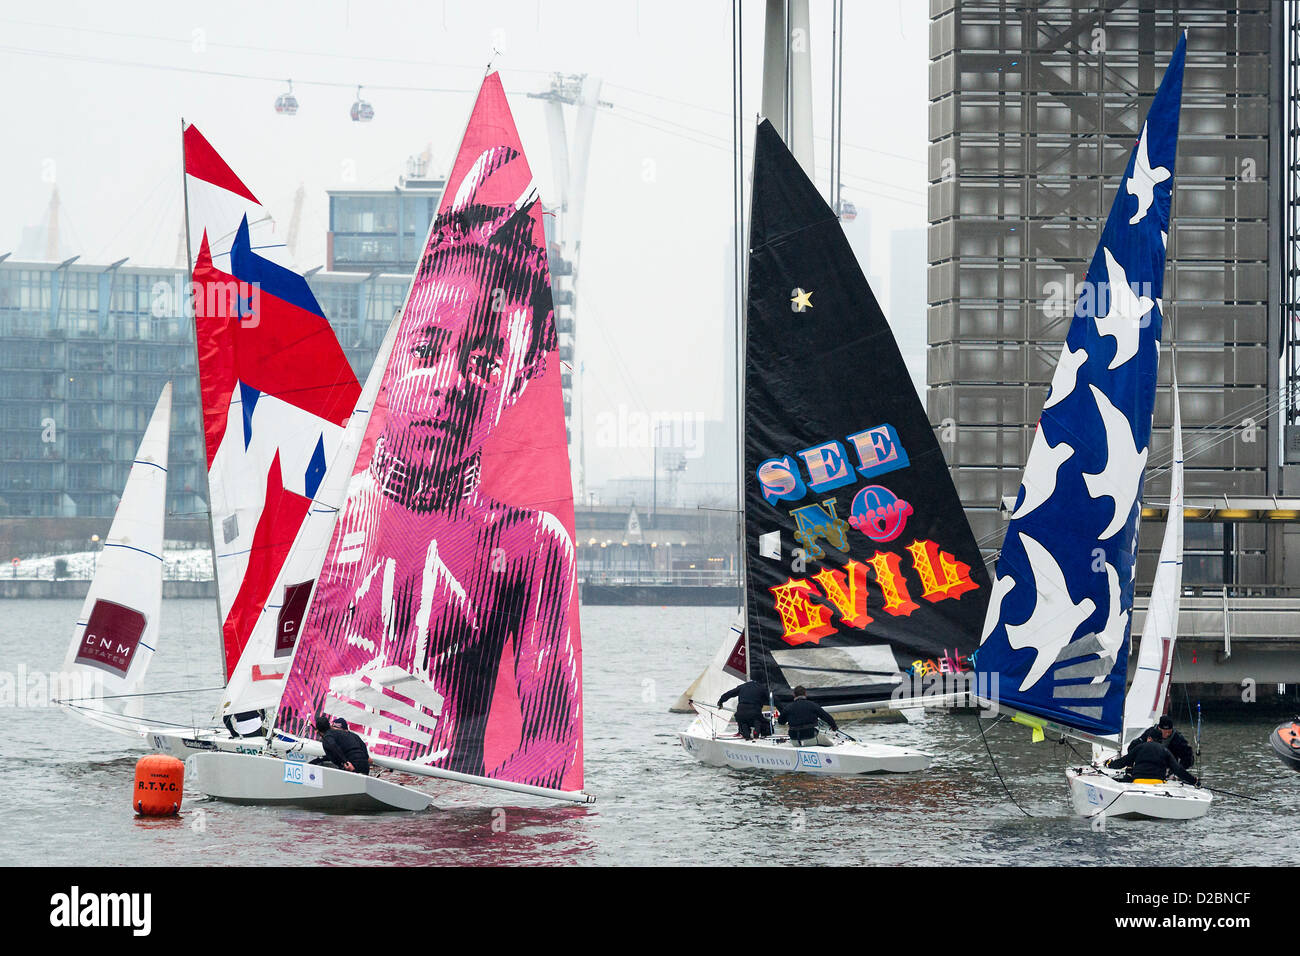 Star Class boats are raced by 20 Olympic and World champion sailors – including triple Olympic medalist Iain Percy, double Olympic medalist Andrew Simpson, Olympic medalists Pippa Wilson, Ian Walker, Luke Patience and Xavier Rohart .  They are using boats with sails designed by a range of artists -  Eine (see no evil), Julian Opie (black lines white sail) , Goldie (pink sail with face) and David Begbie (black and white face). This is the first time sailing and art has been brought together in a match racing series. The London Boat Show, Excel centre, Docklands, London, UK 19 January 2013. Stock Photo